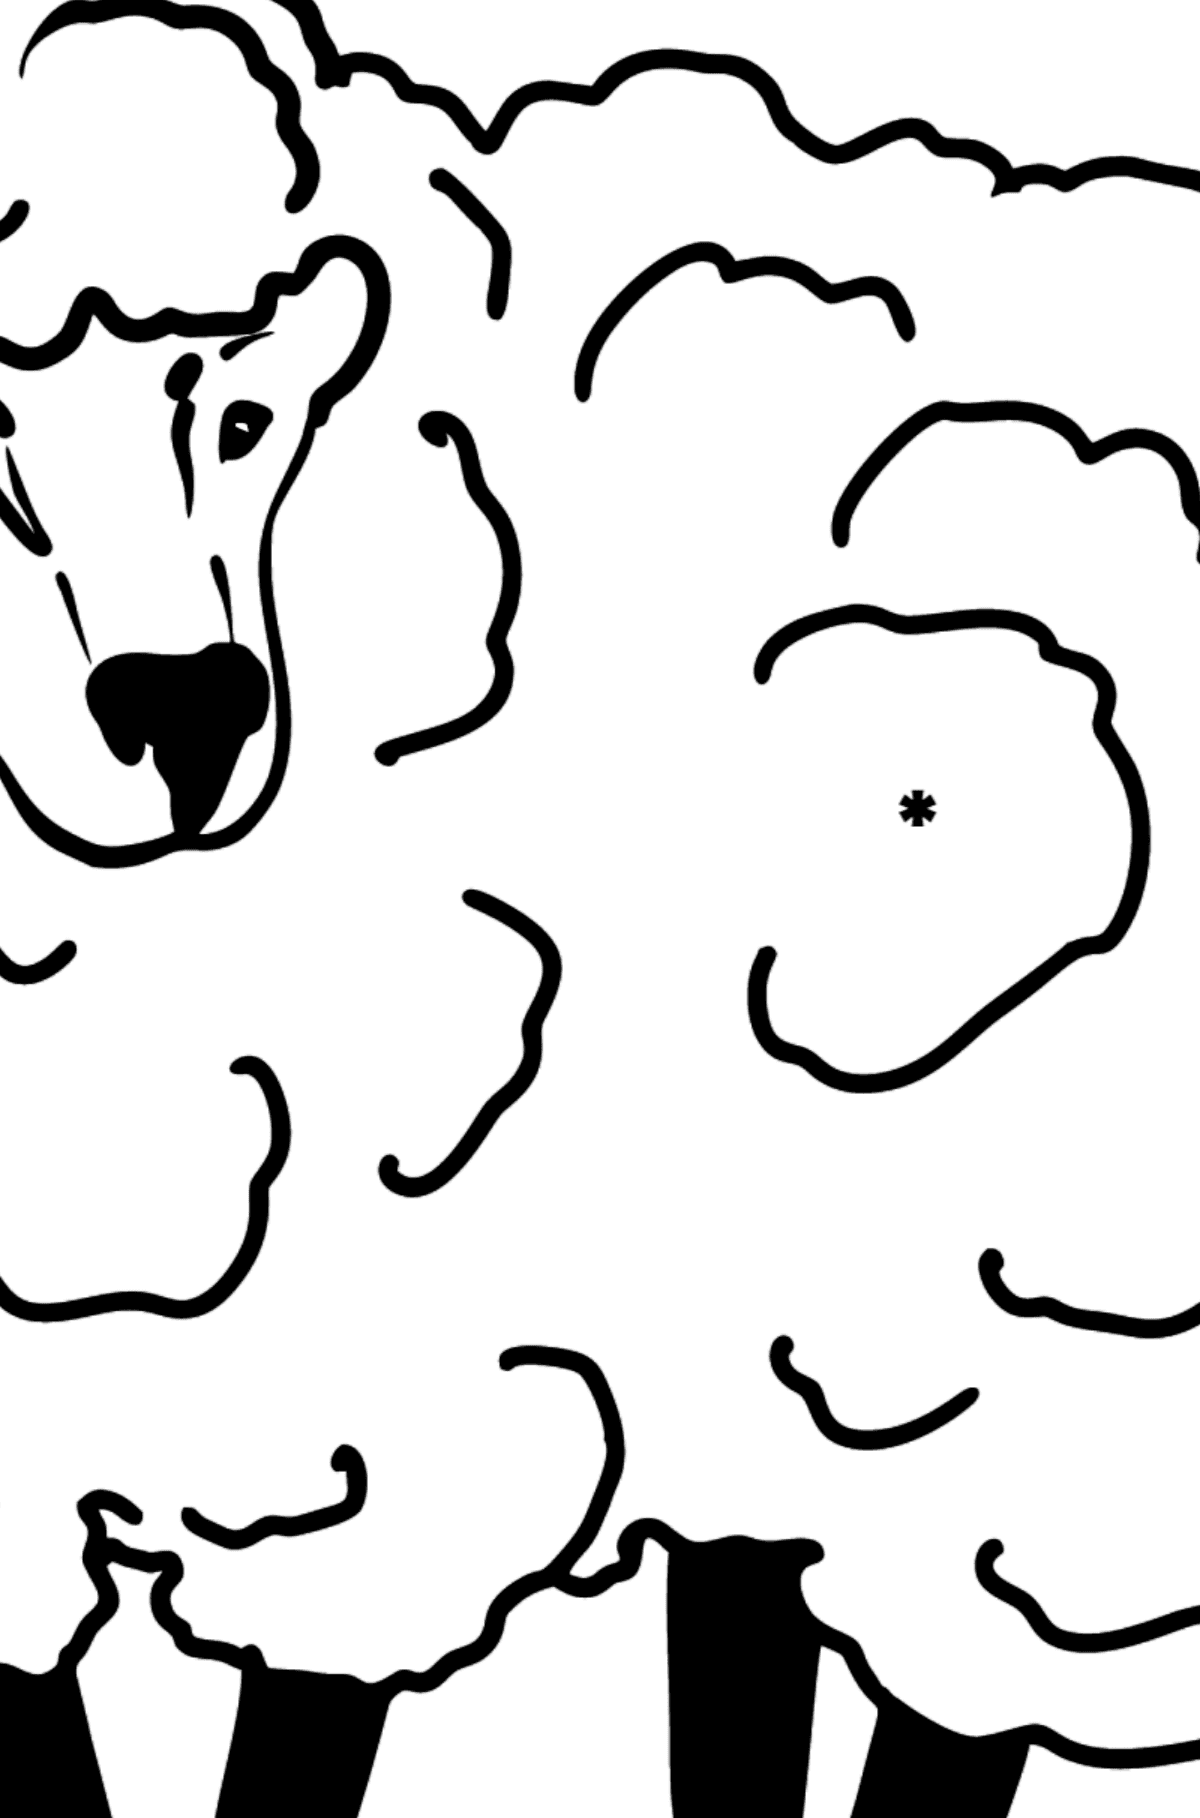 Sheep coloring page - Coloring by Symbols for Kids